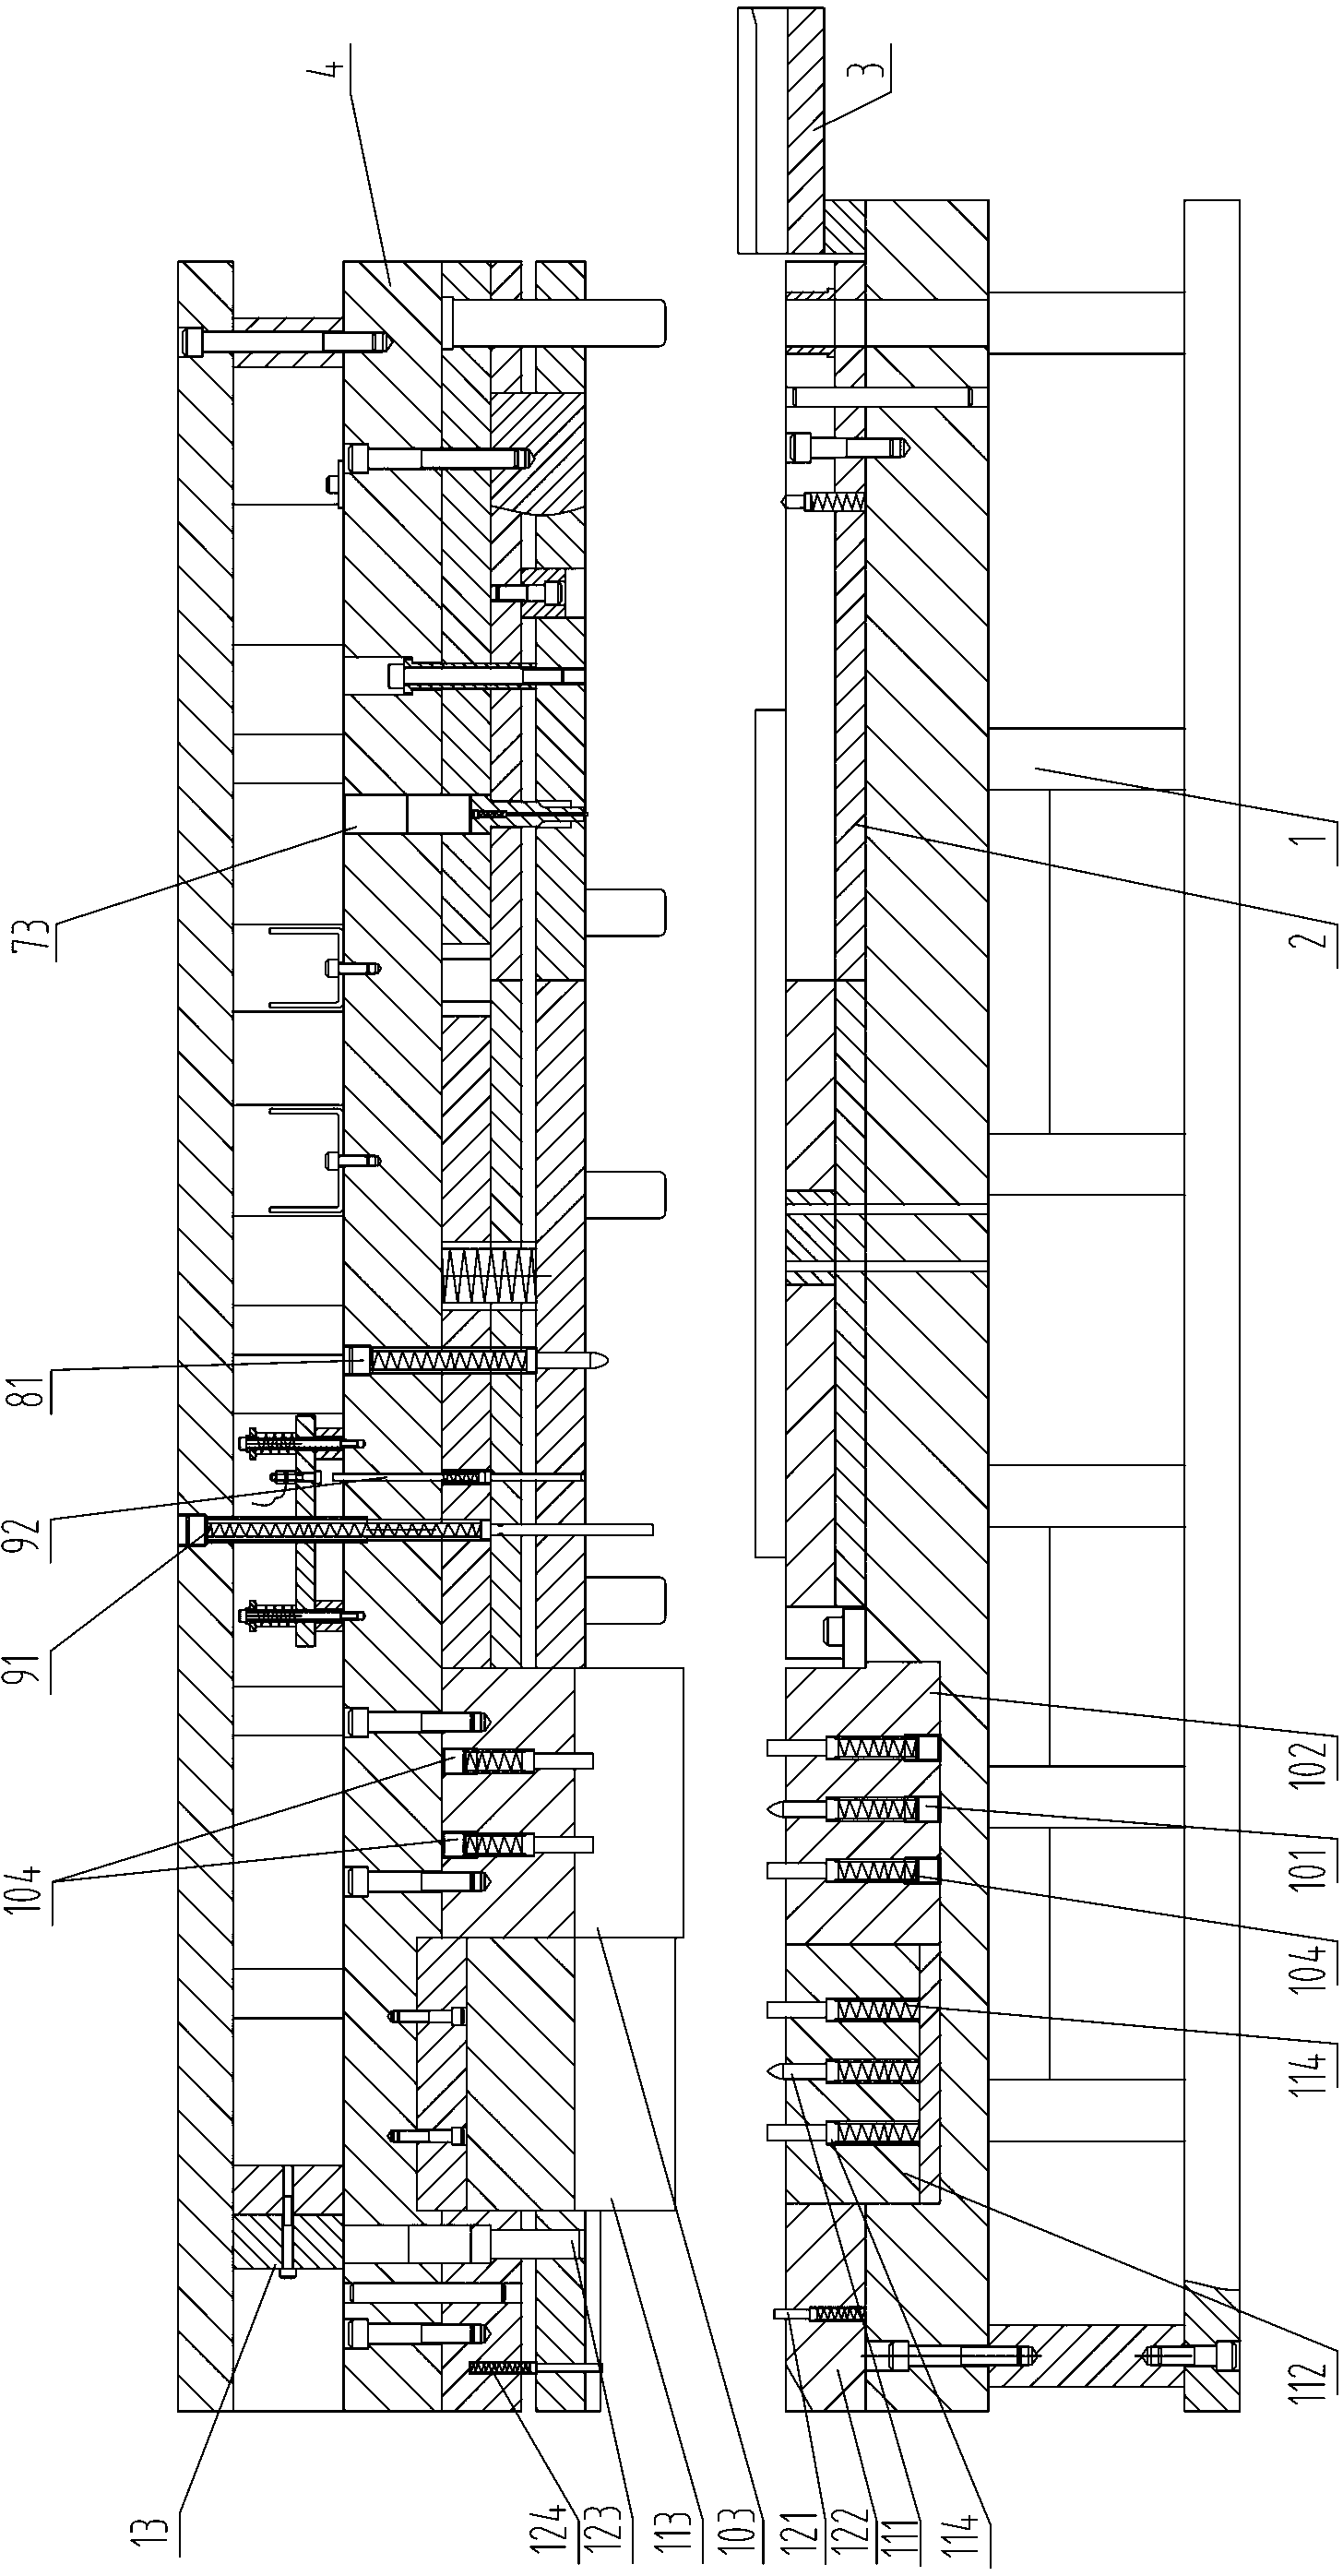 Brake shoe bending plate continuous die and method for using continuous die to machine brake shoe bending plate